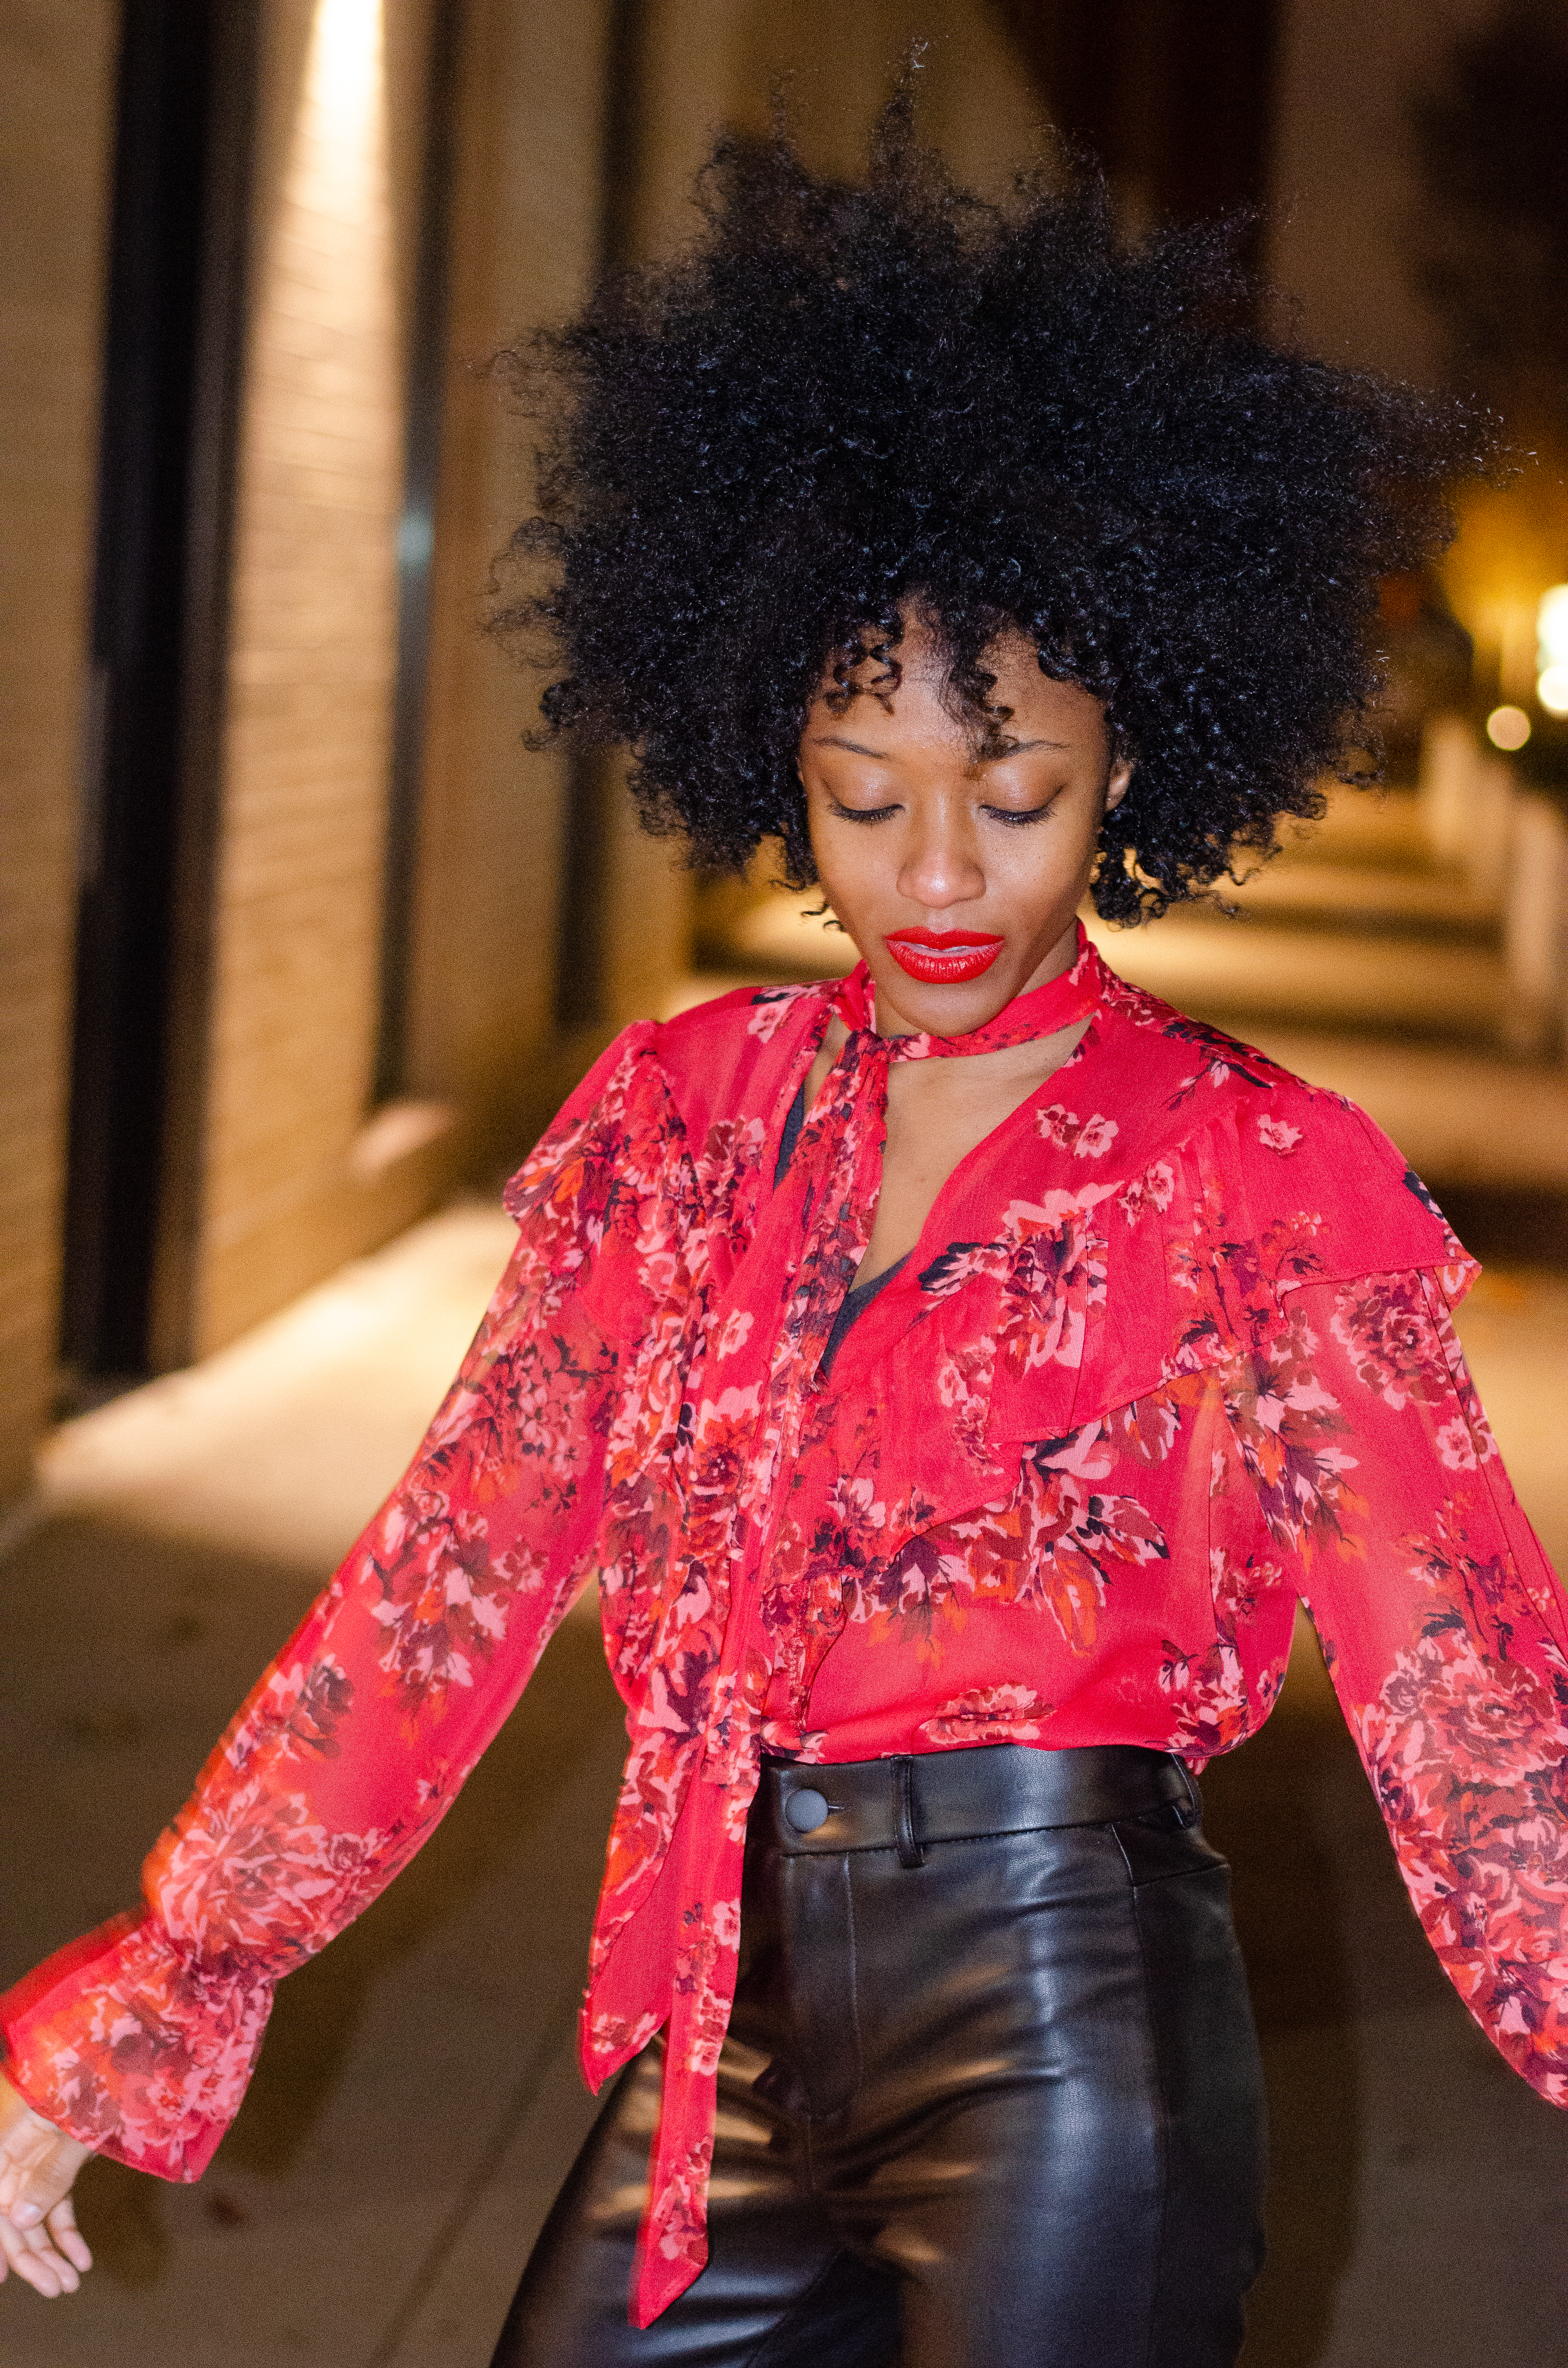 Fashion blogger Kamara Williams shares her fashion girl gift guide for the best gifts for the style lover in your life